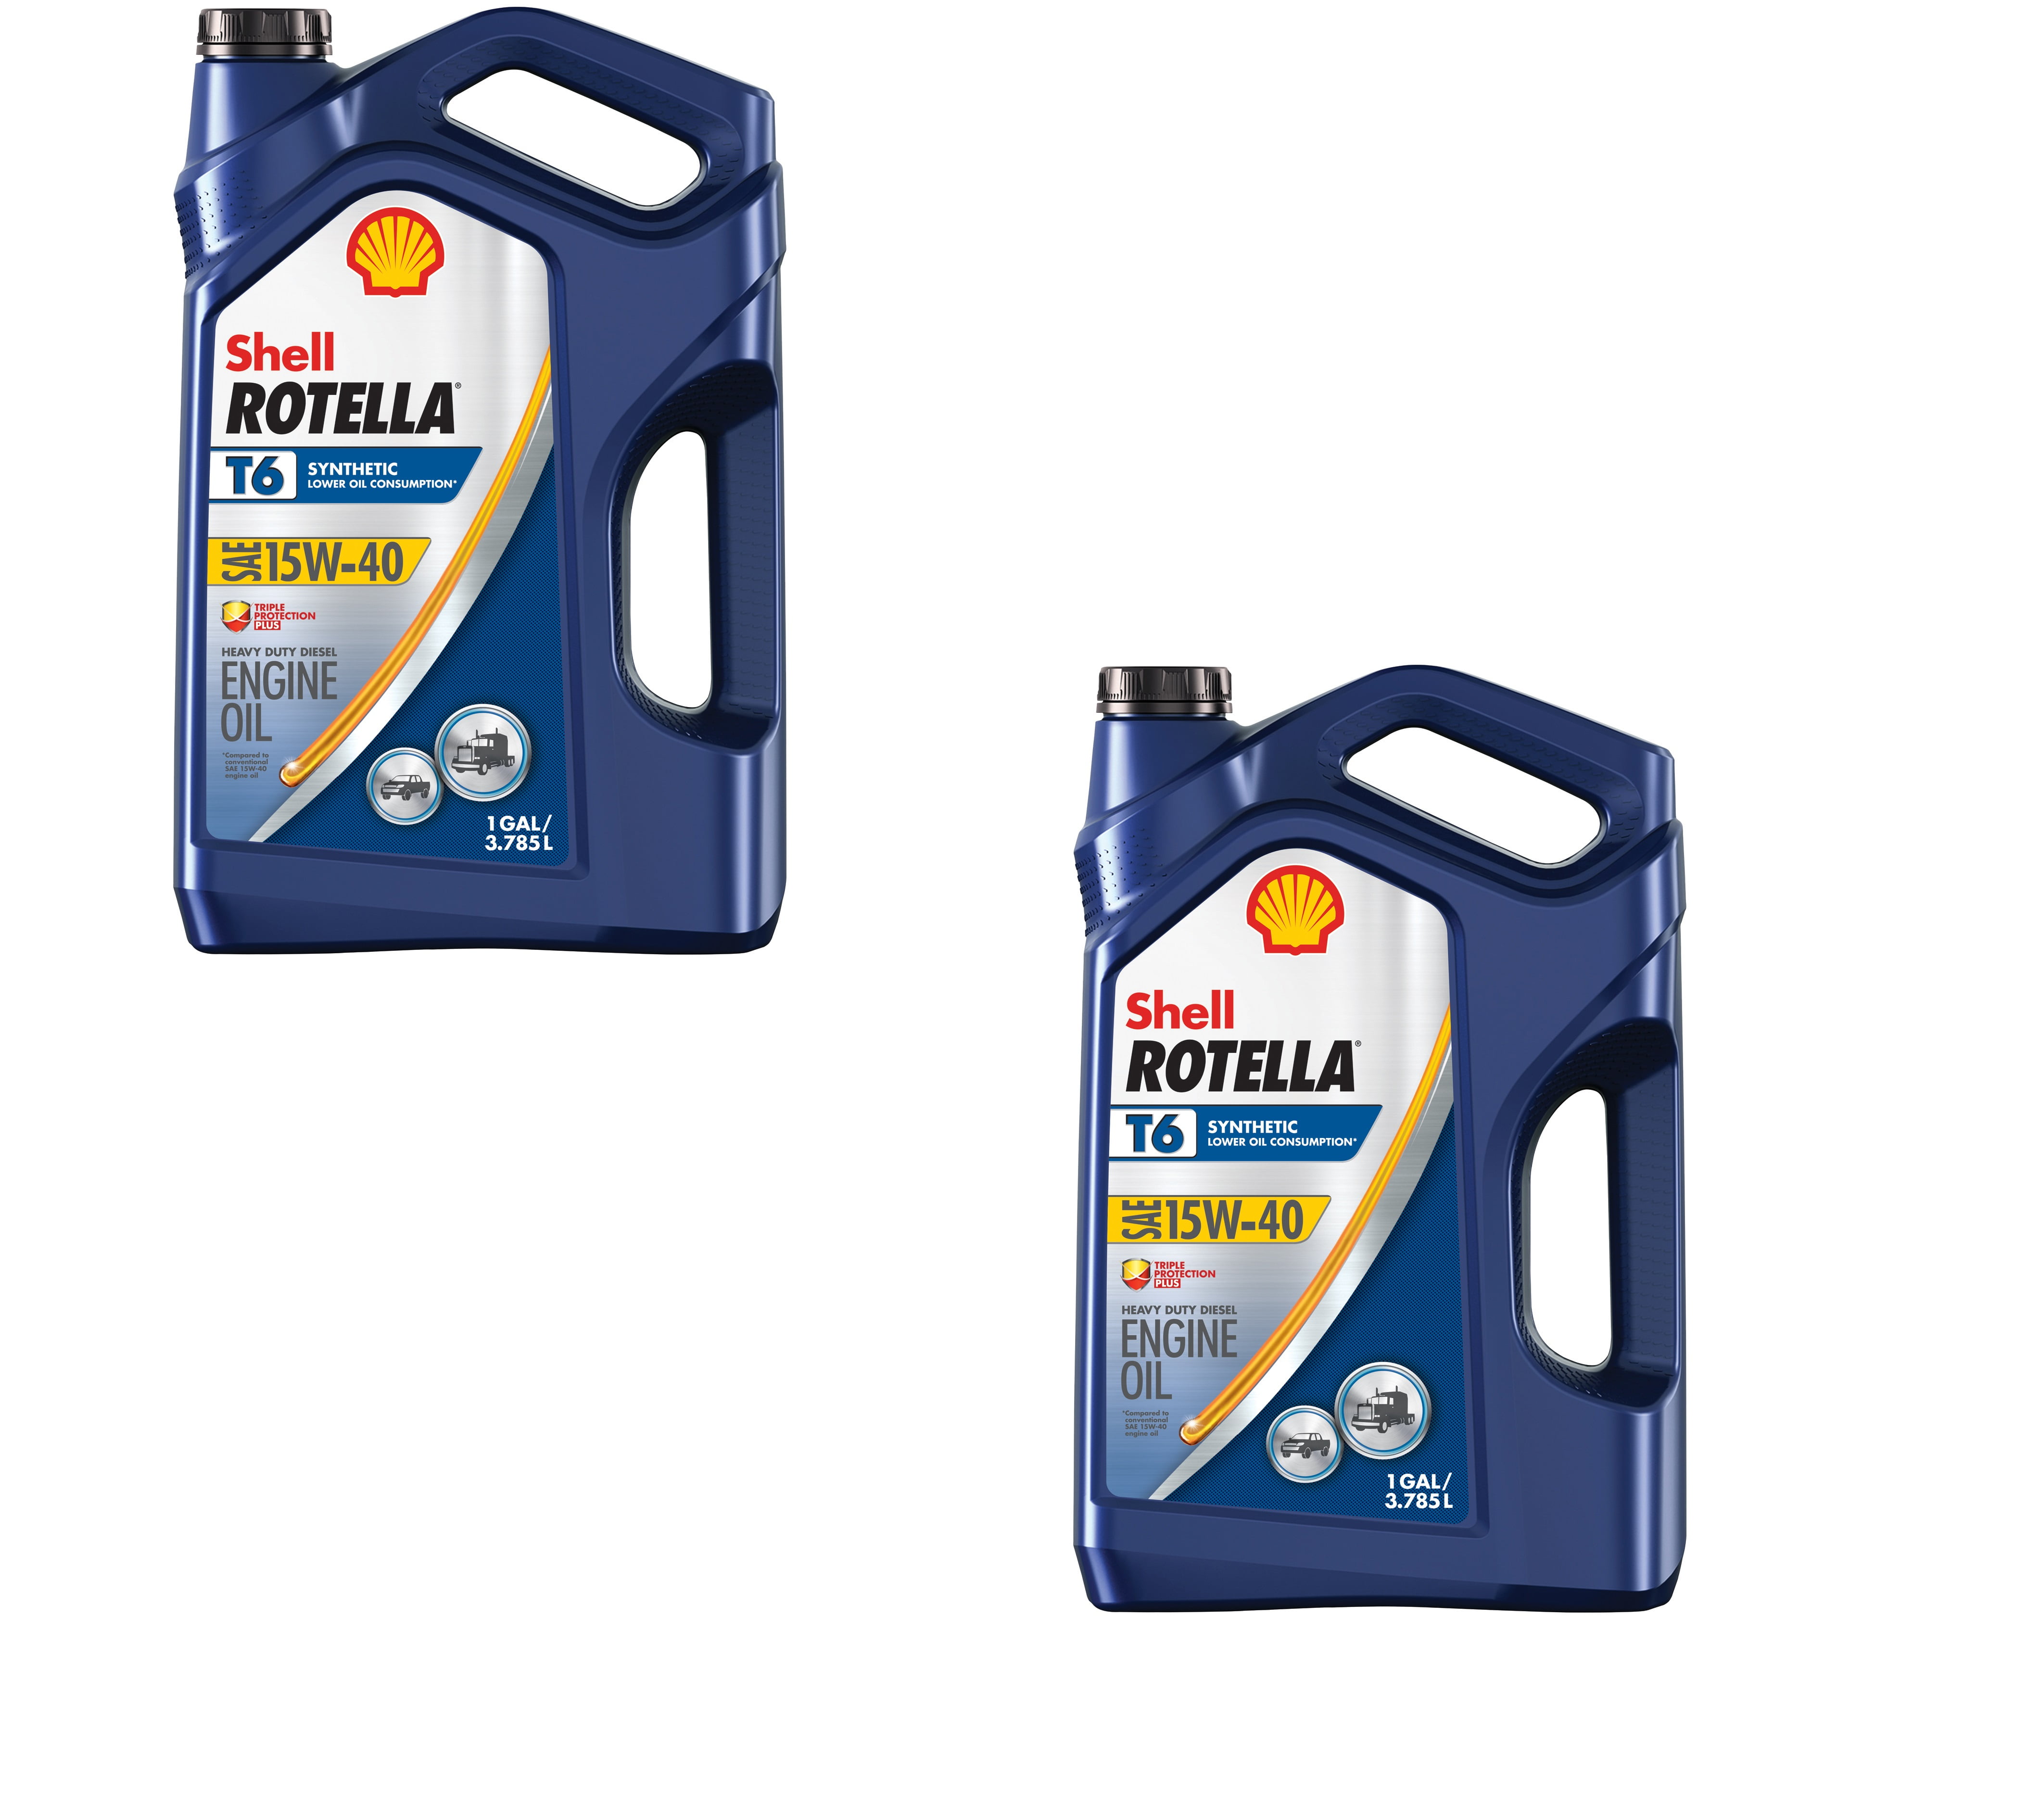 shell-rotella-t6-full-synthetic-diesel-motor-oil-sae-15w-40-1-gallon